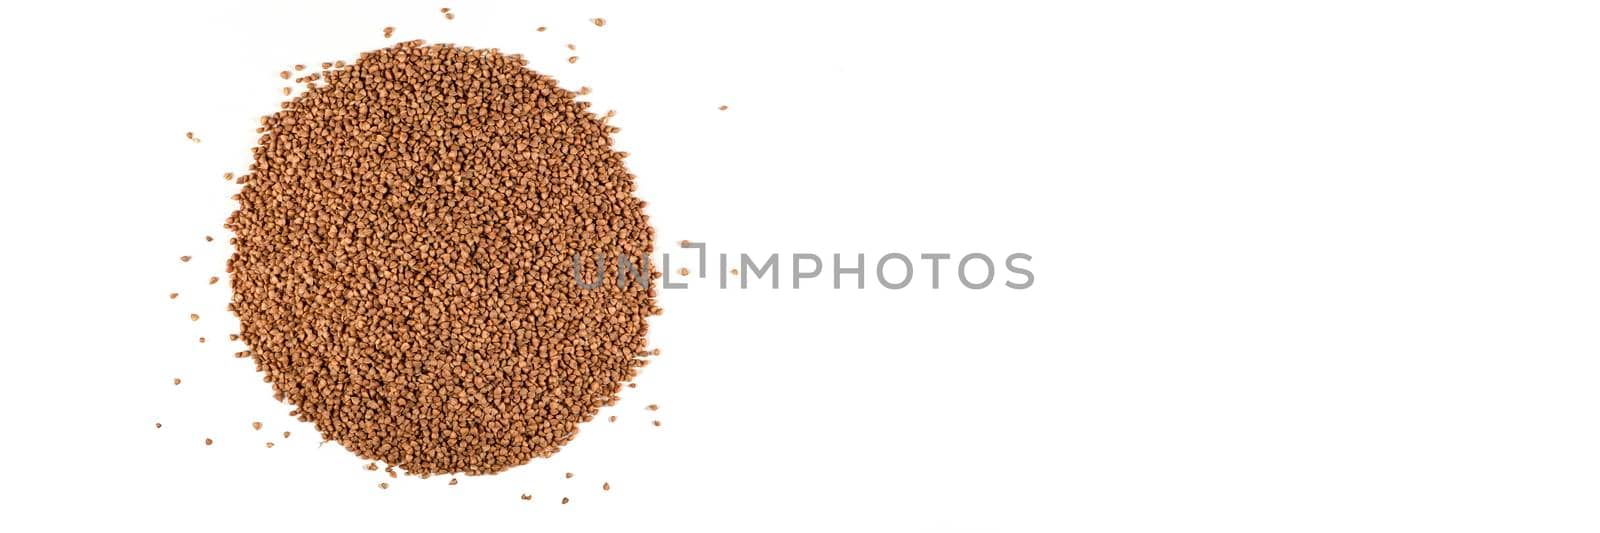 Texture of buckwheat. Background for dry buckwheat design. Large size for banner printing or packaging. Top view of evenly scattered buckwheat groats